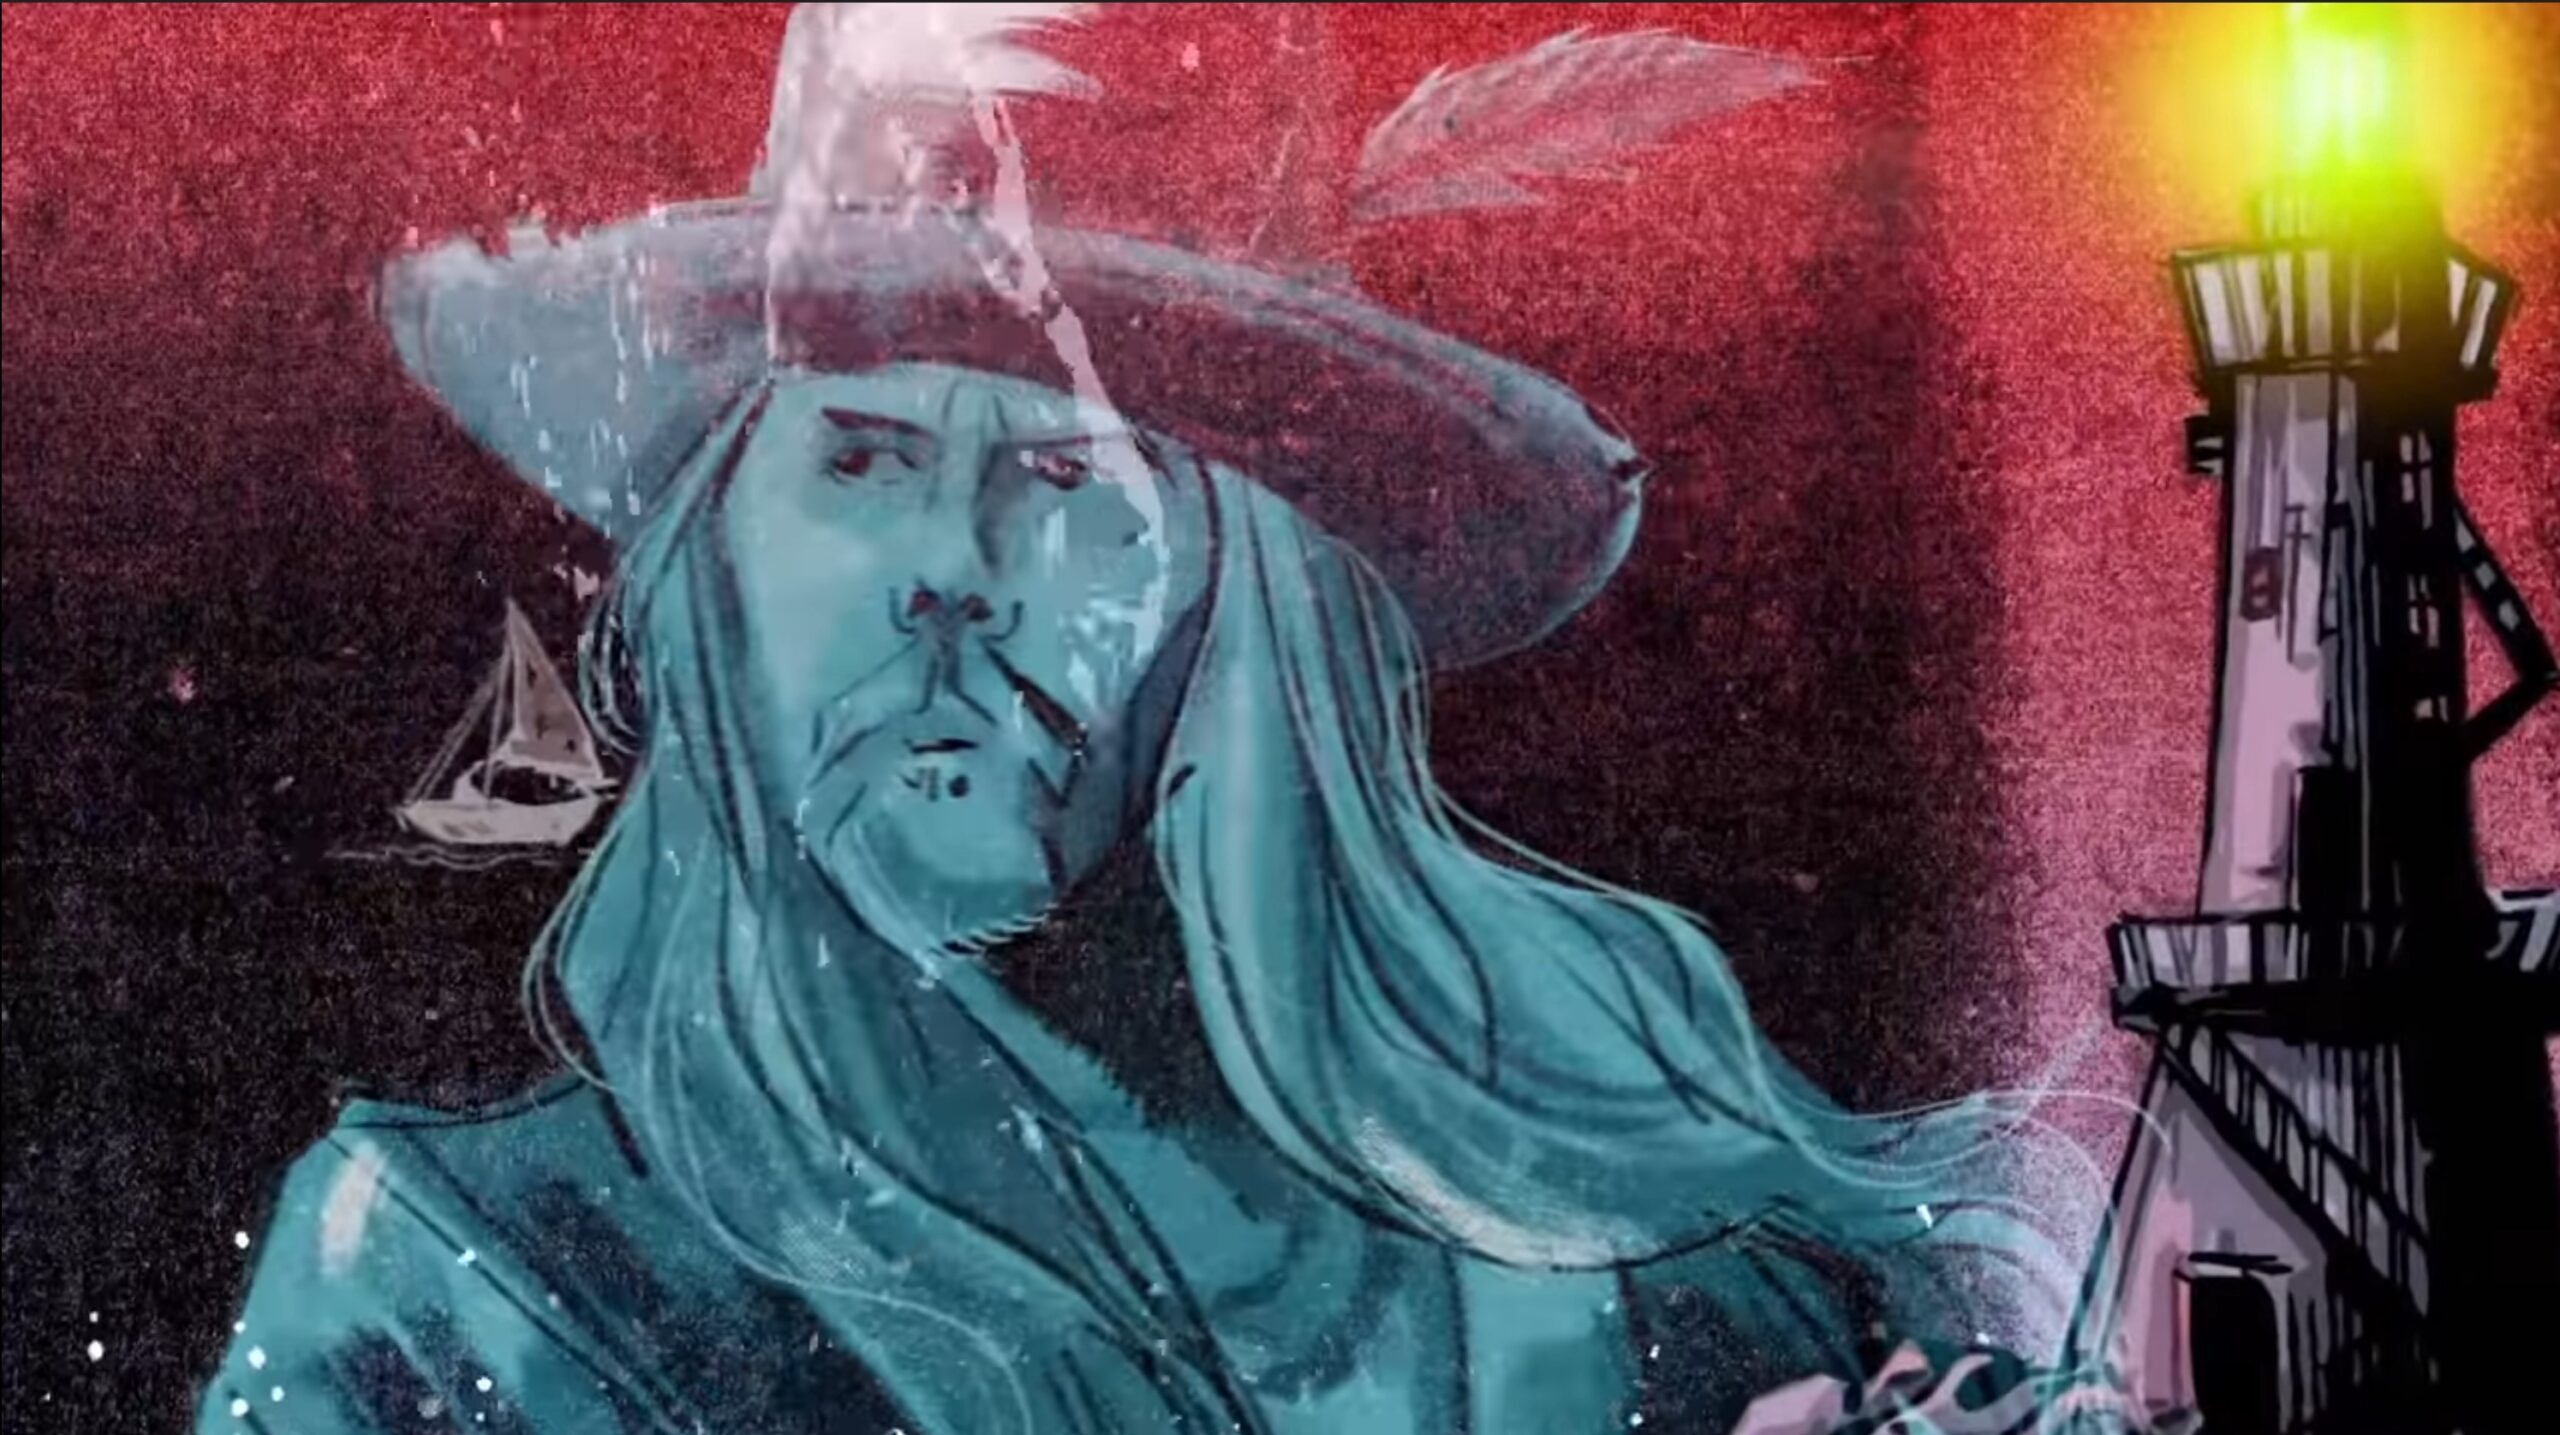 Jerry Cantrell Releases Animated Video for Siren Song